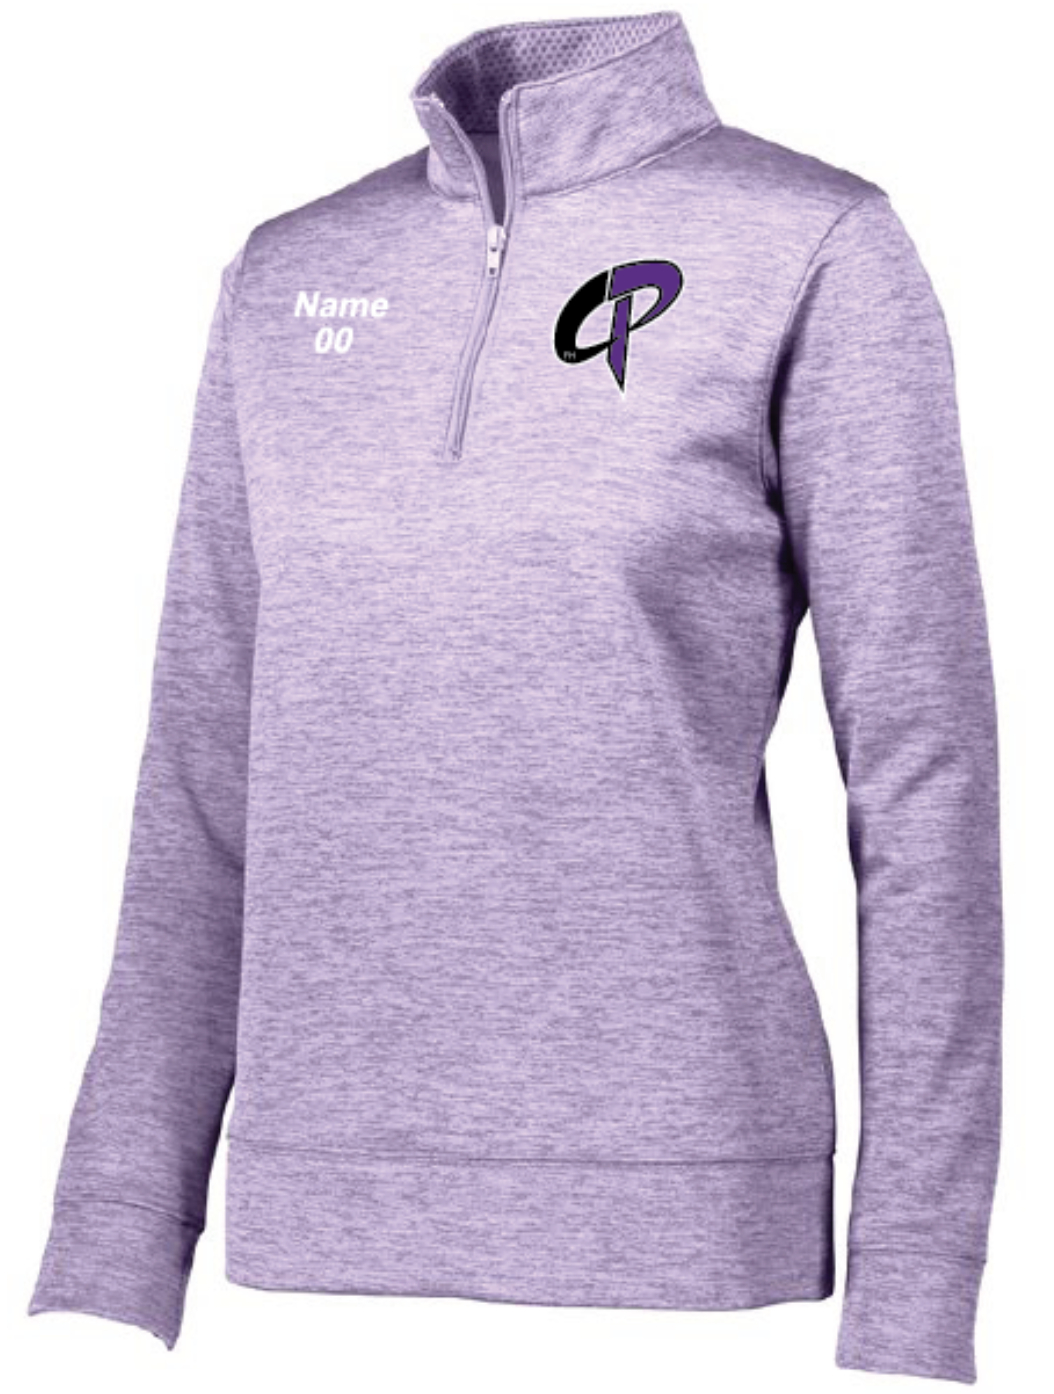 CPFH Performance Ladies Heather Pullover